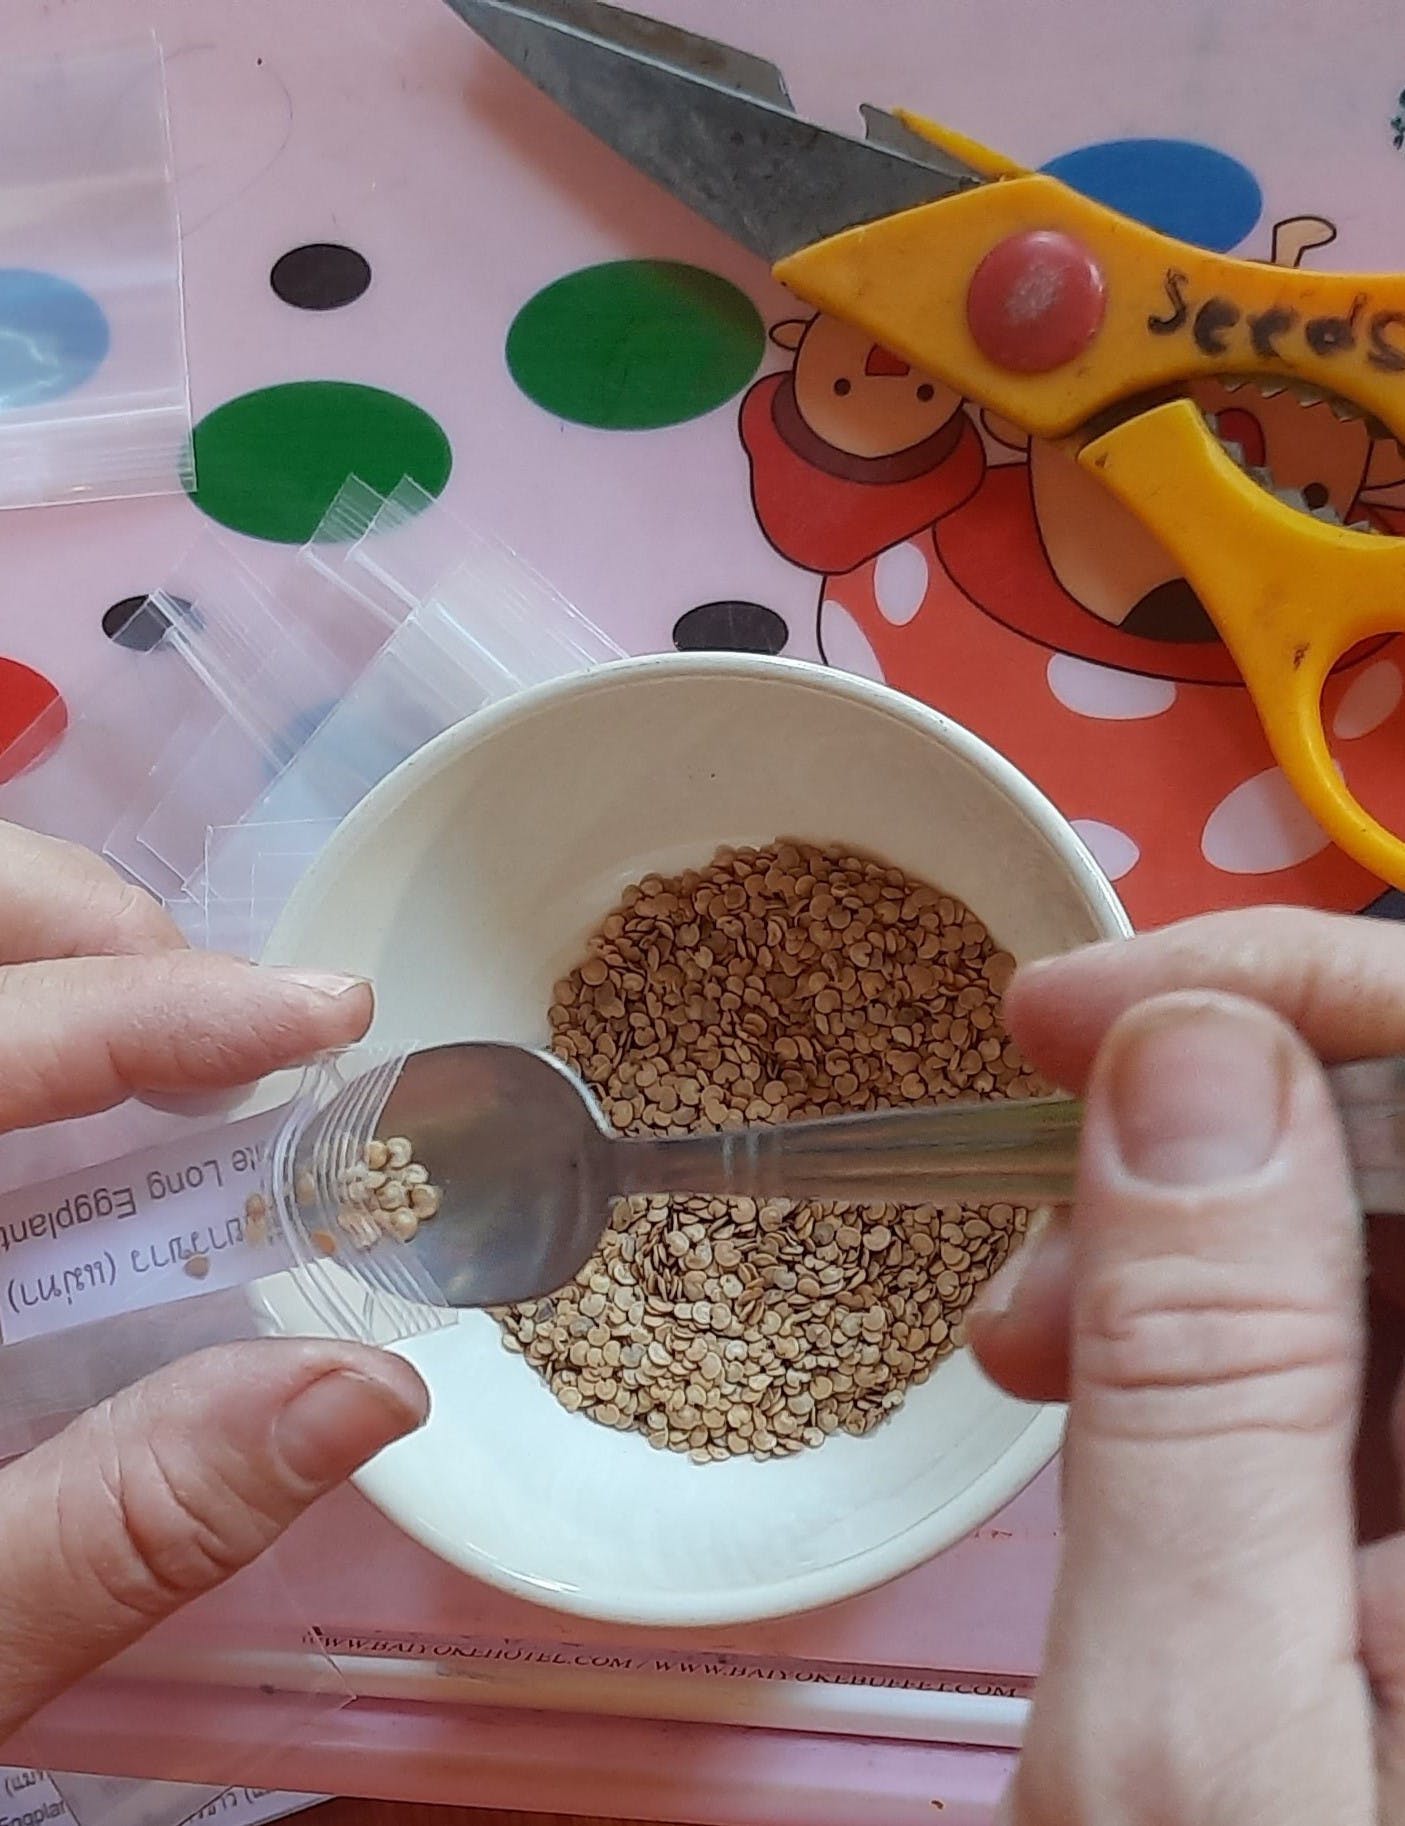 Close-up photo of hands scooping up some brinjal seeds from a white bowl with a small teaspoon, and transferring it to a small ziplock bag.